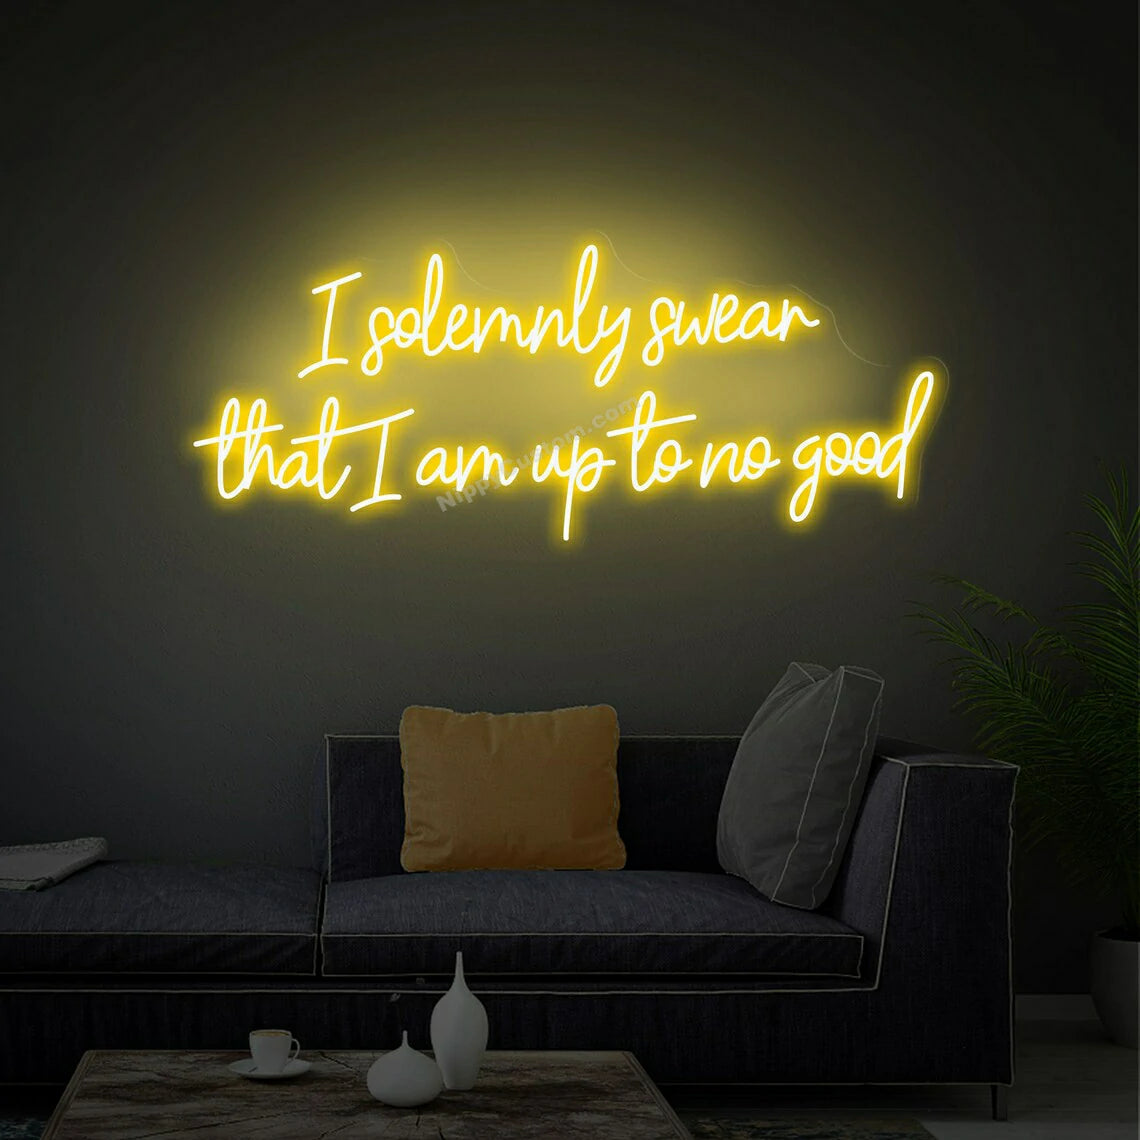 I Solemnly Swear That I Am Up To No Good Neon Sign, Neon Sign Bedroom Wall Art Decor, Wall Decor, Wall Led Light, Custom Neon Sign